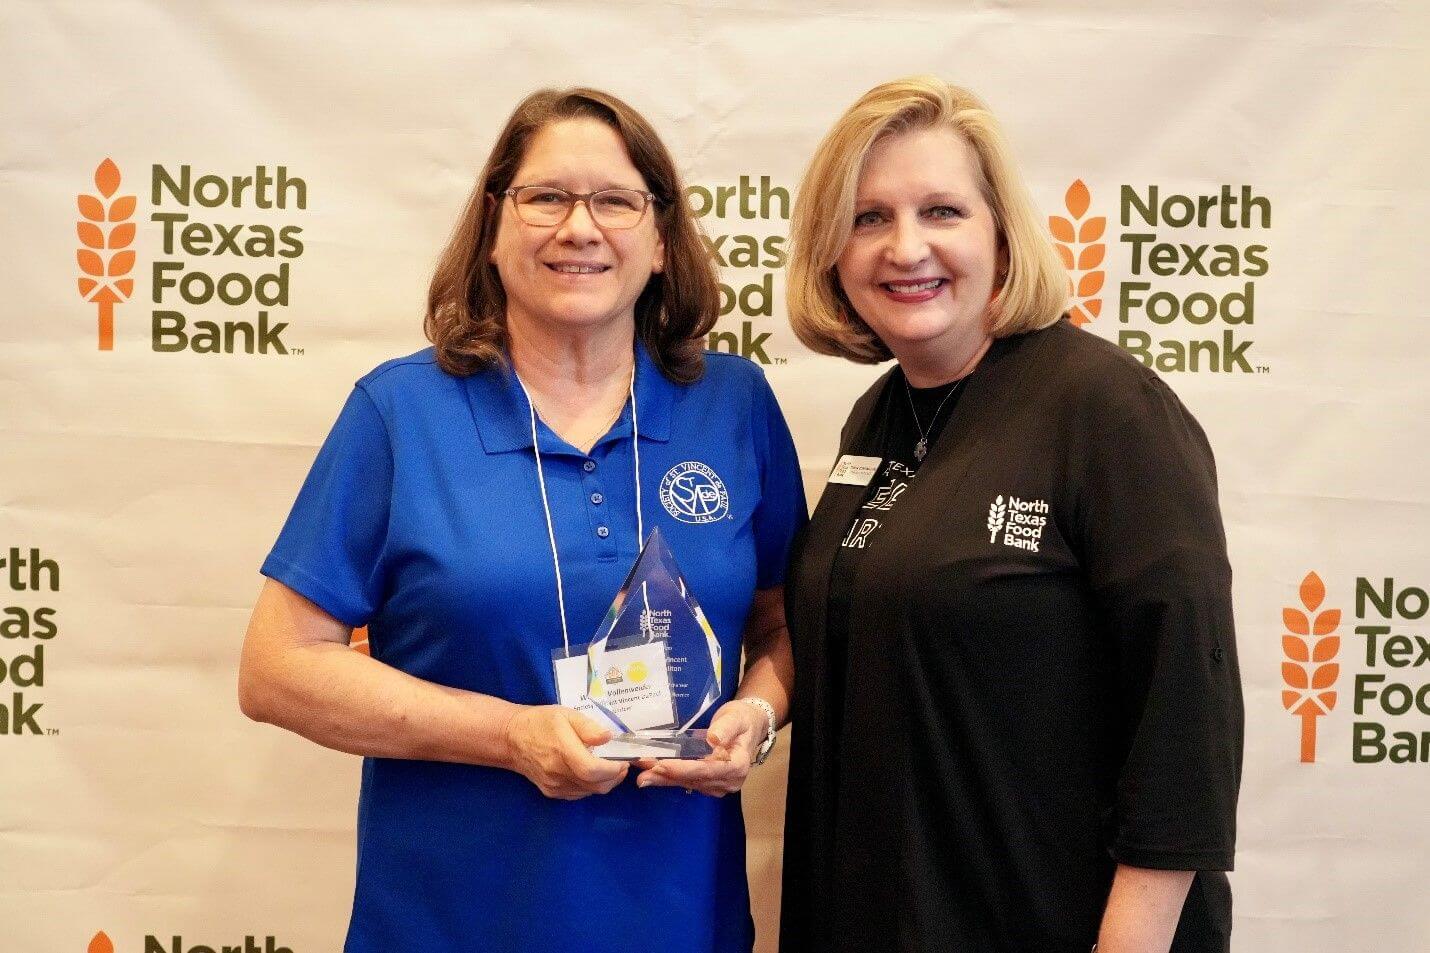 Wanda Vollenweider with The Society of St. Vincent DePaul Pantry and Trisha Cunningham, NTFB President &amp; CEO